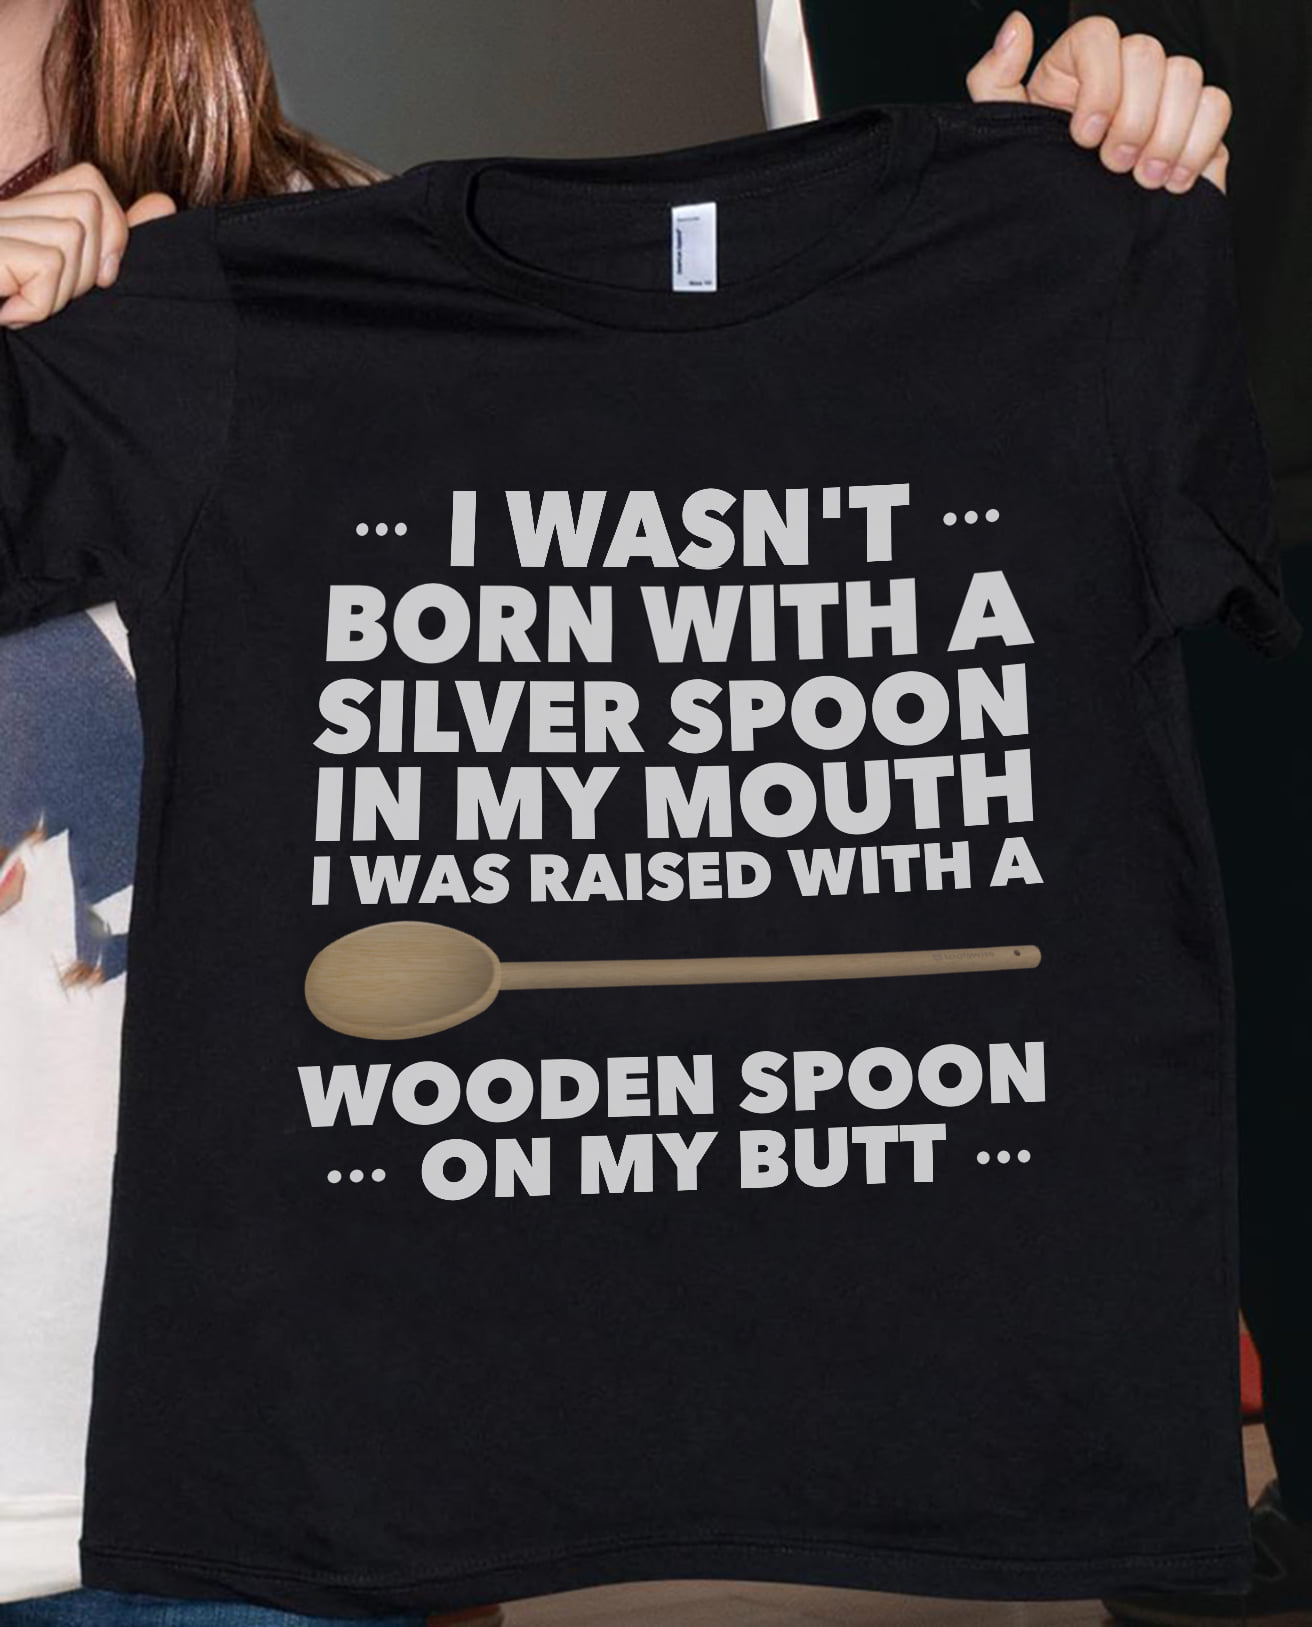 I wasn't born with a silver spoon in my mouth I was raised with a wooden spoon on my butt